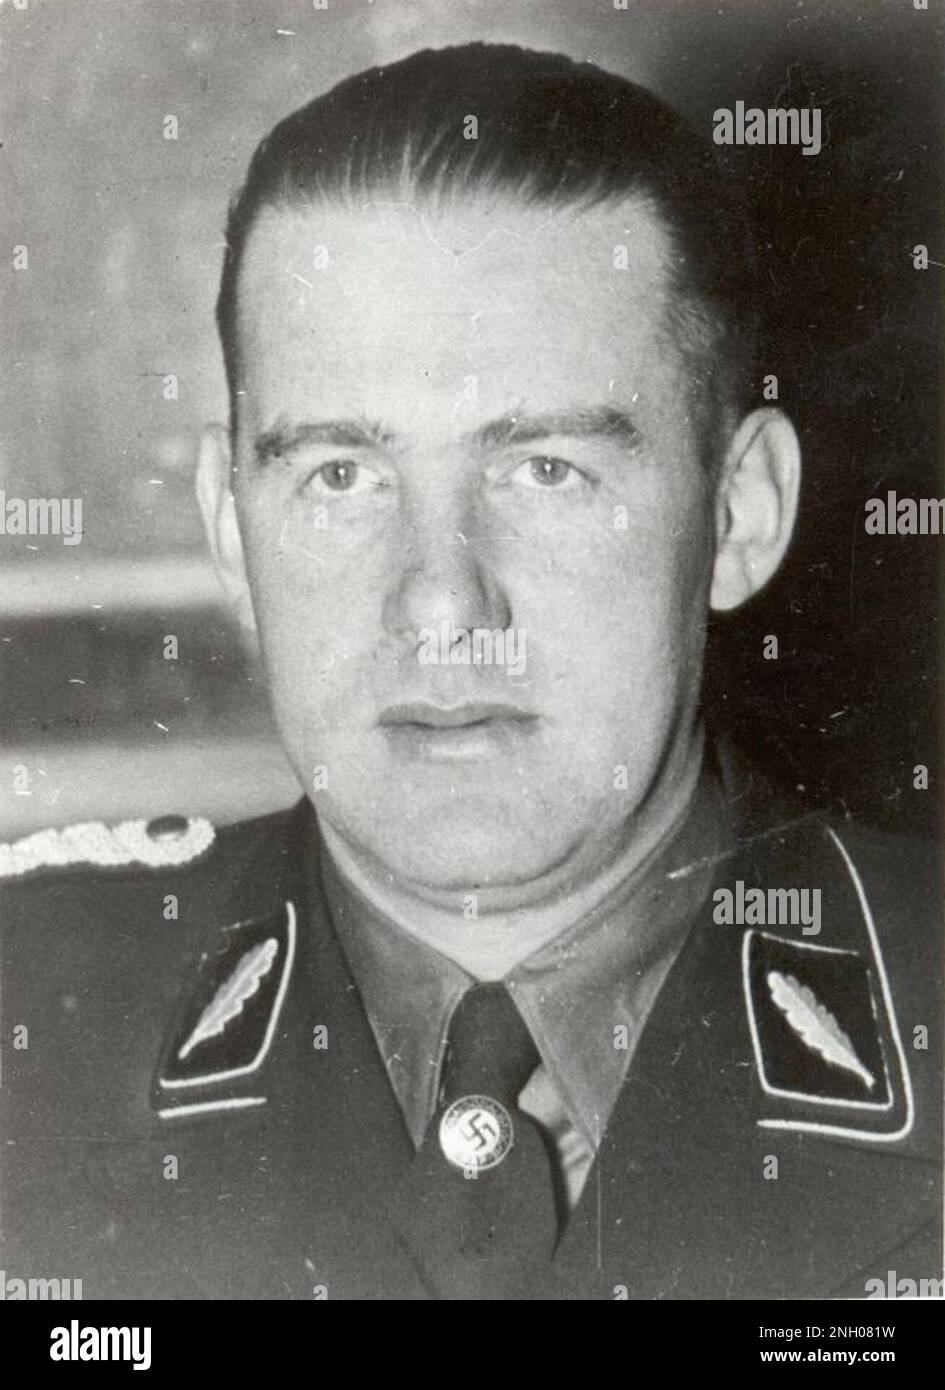 SS officer Odilo Globocnik (Germanised to Globotschnigg ). He had a leading role in Operation Reinhard, the organized murder of around one and a half million Jews in the Majdanek, Treblinka, Sobibor and Belzec extermination camps. Photo By Bundesarchiv, Bild 146-2007-0188 / CC-BY-SA 3.0, CC BY-SA 3.0 de, https://commons.wikimedia.org/w/index.php?curid=5483988 Stock Photo